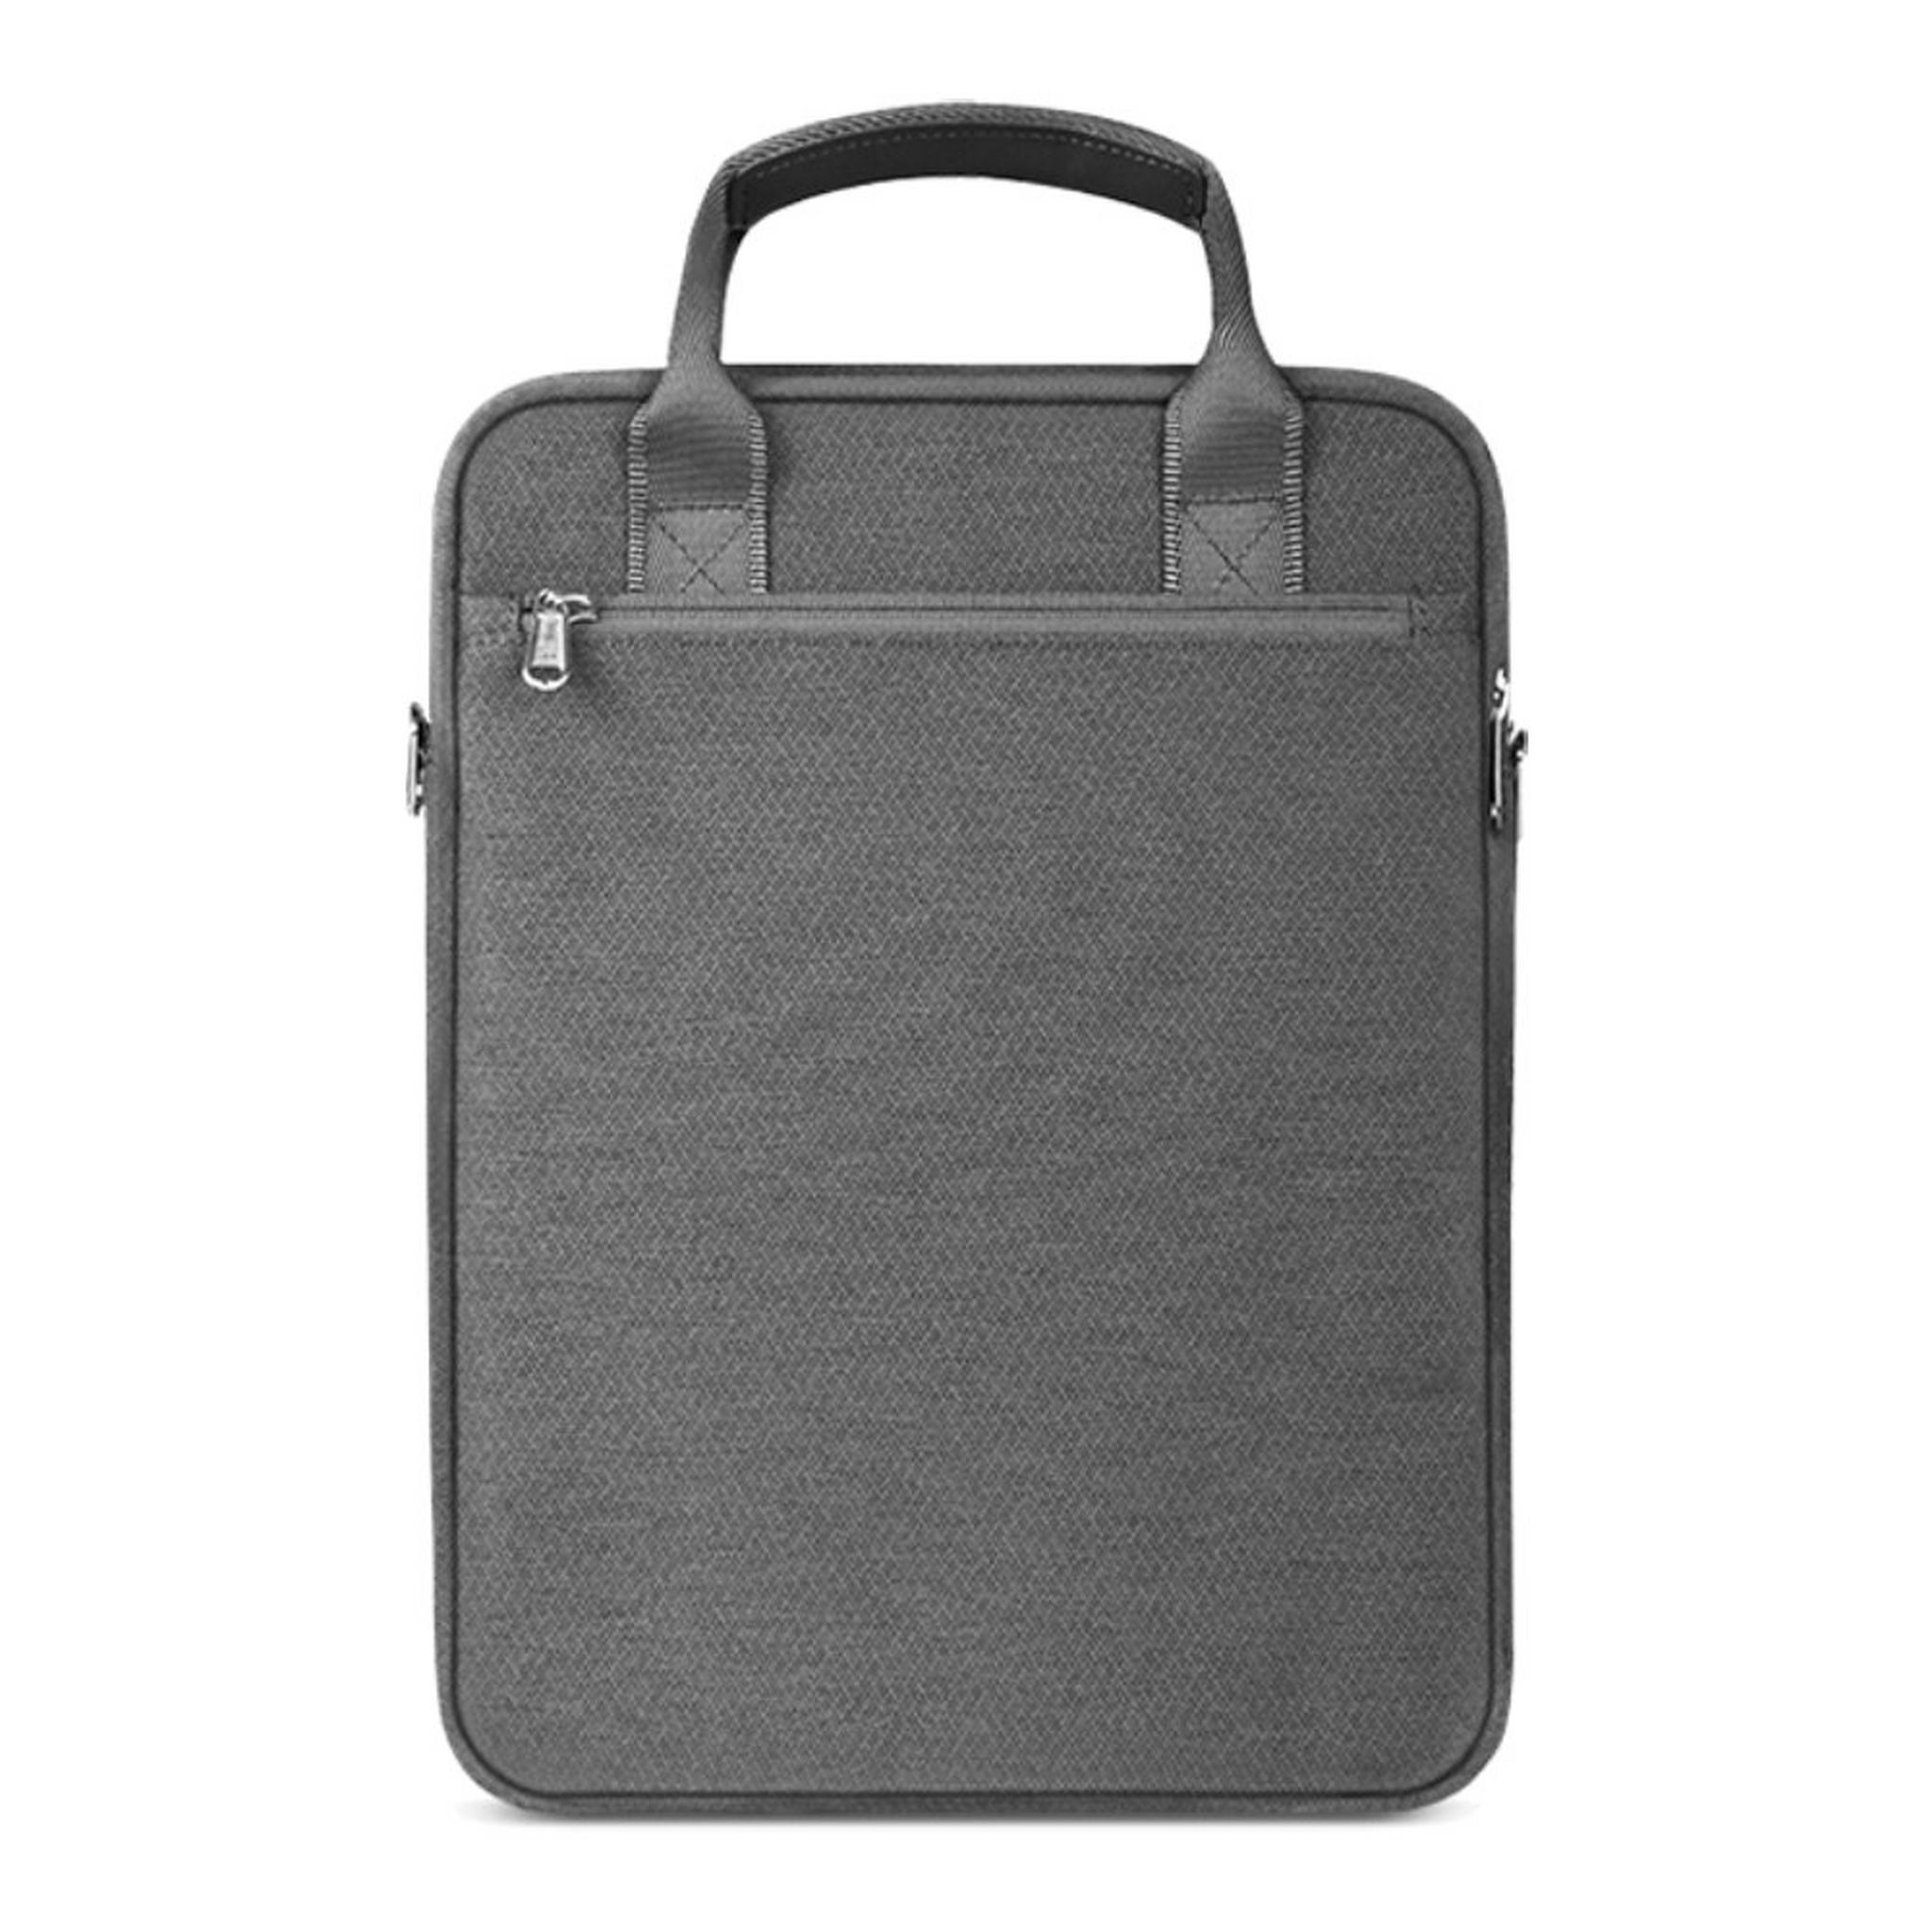 Wiwu Alpha Vertical Double Layer Bag For 13.3-inch Laptop - Grey